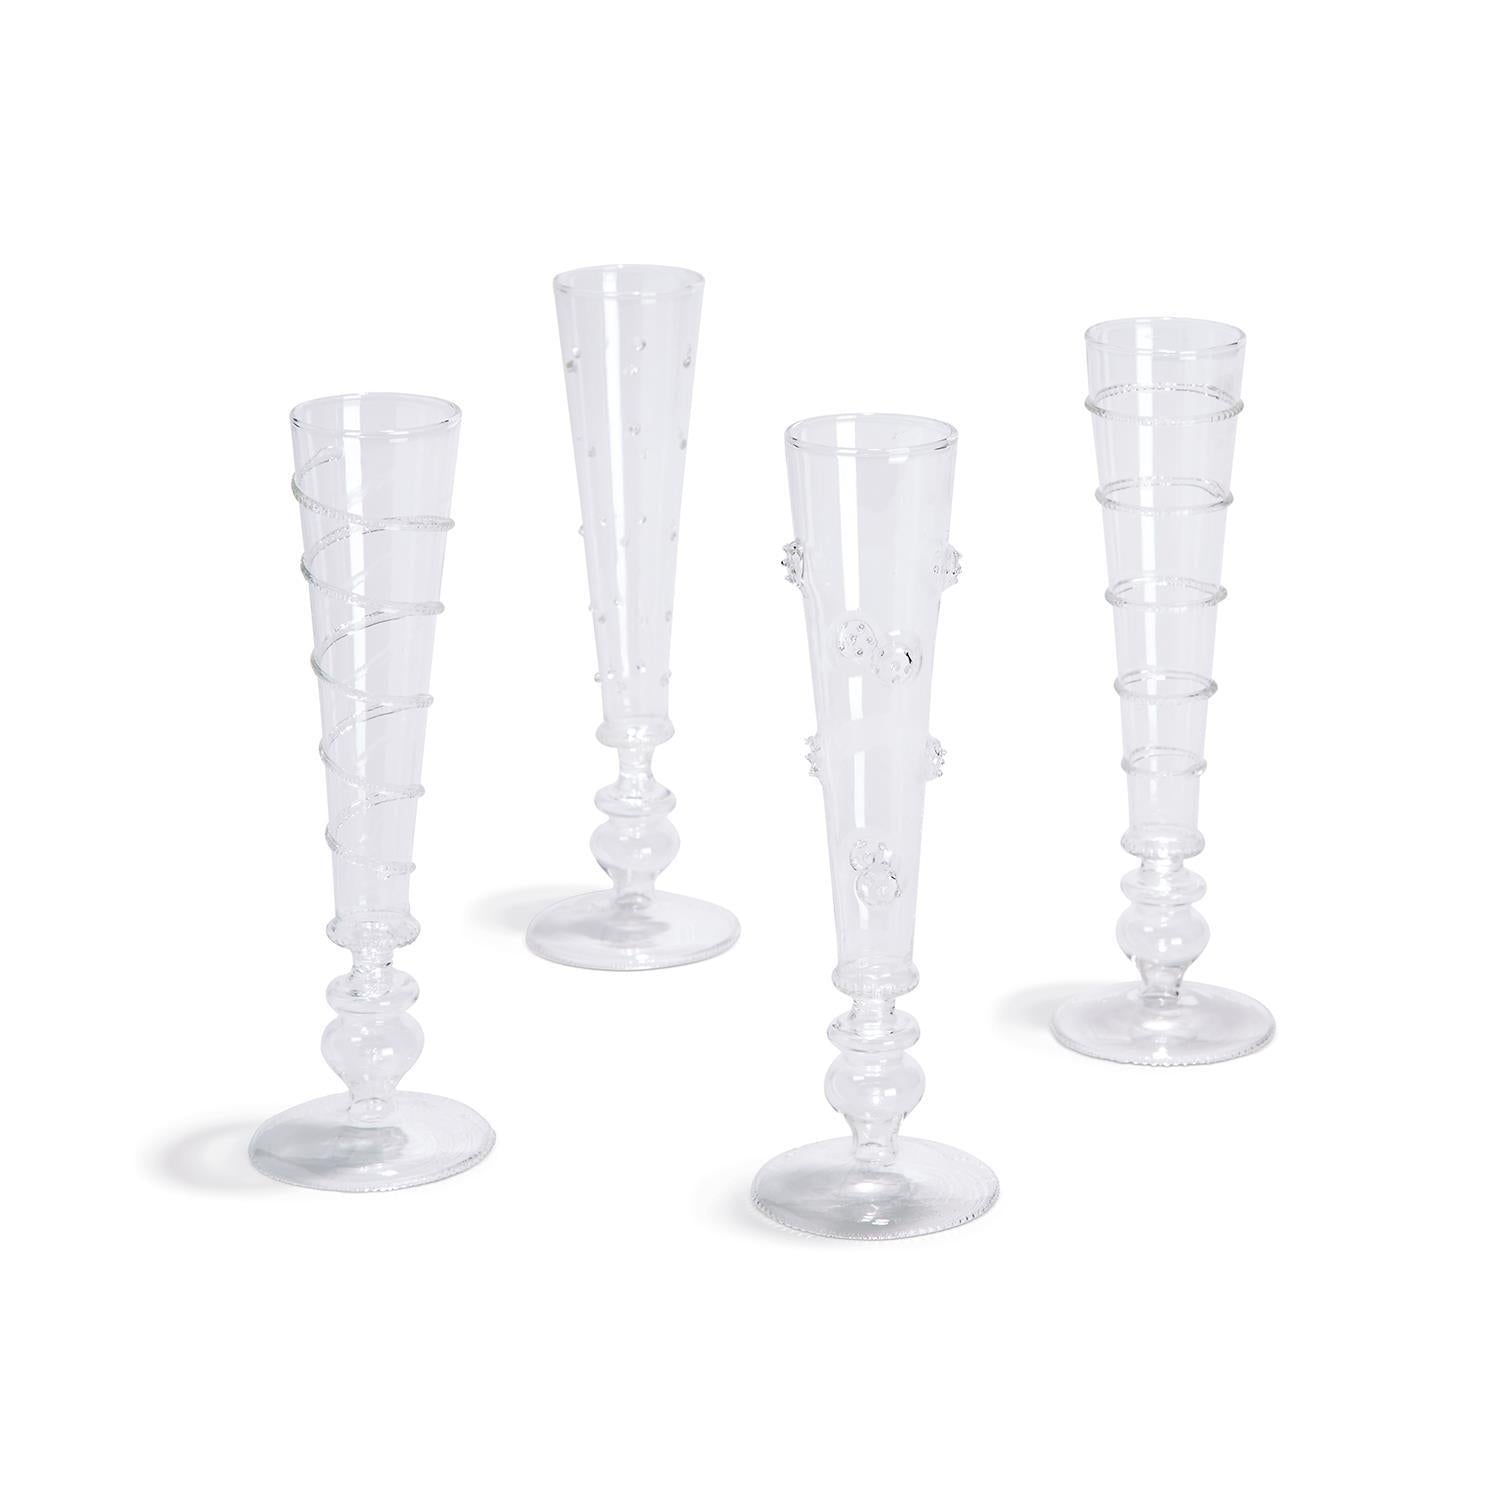 Two's Company Verre Champagne Flute - Set of 12- Hand Blown Glass - 2